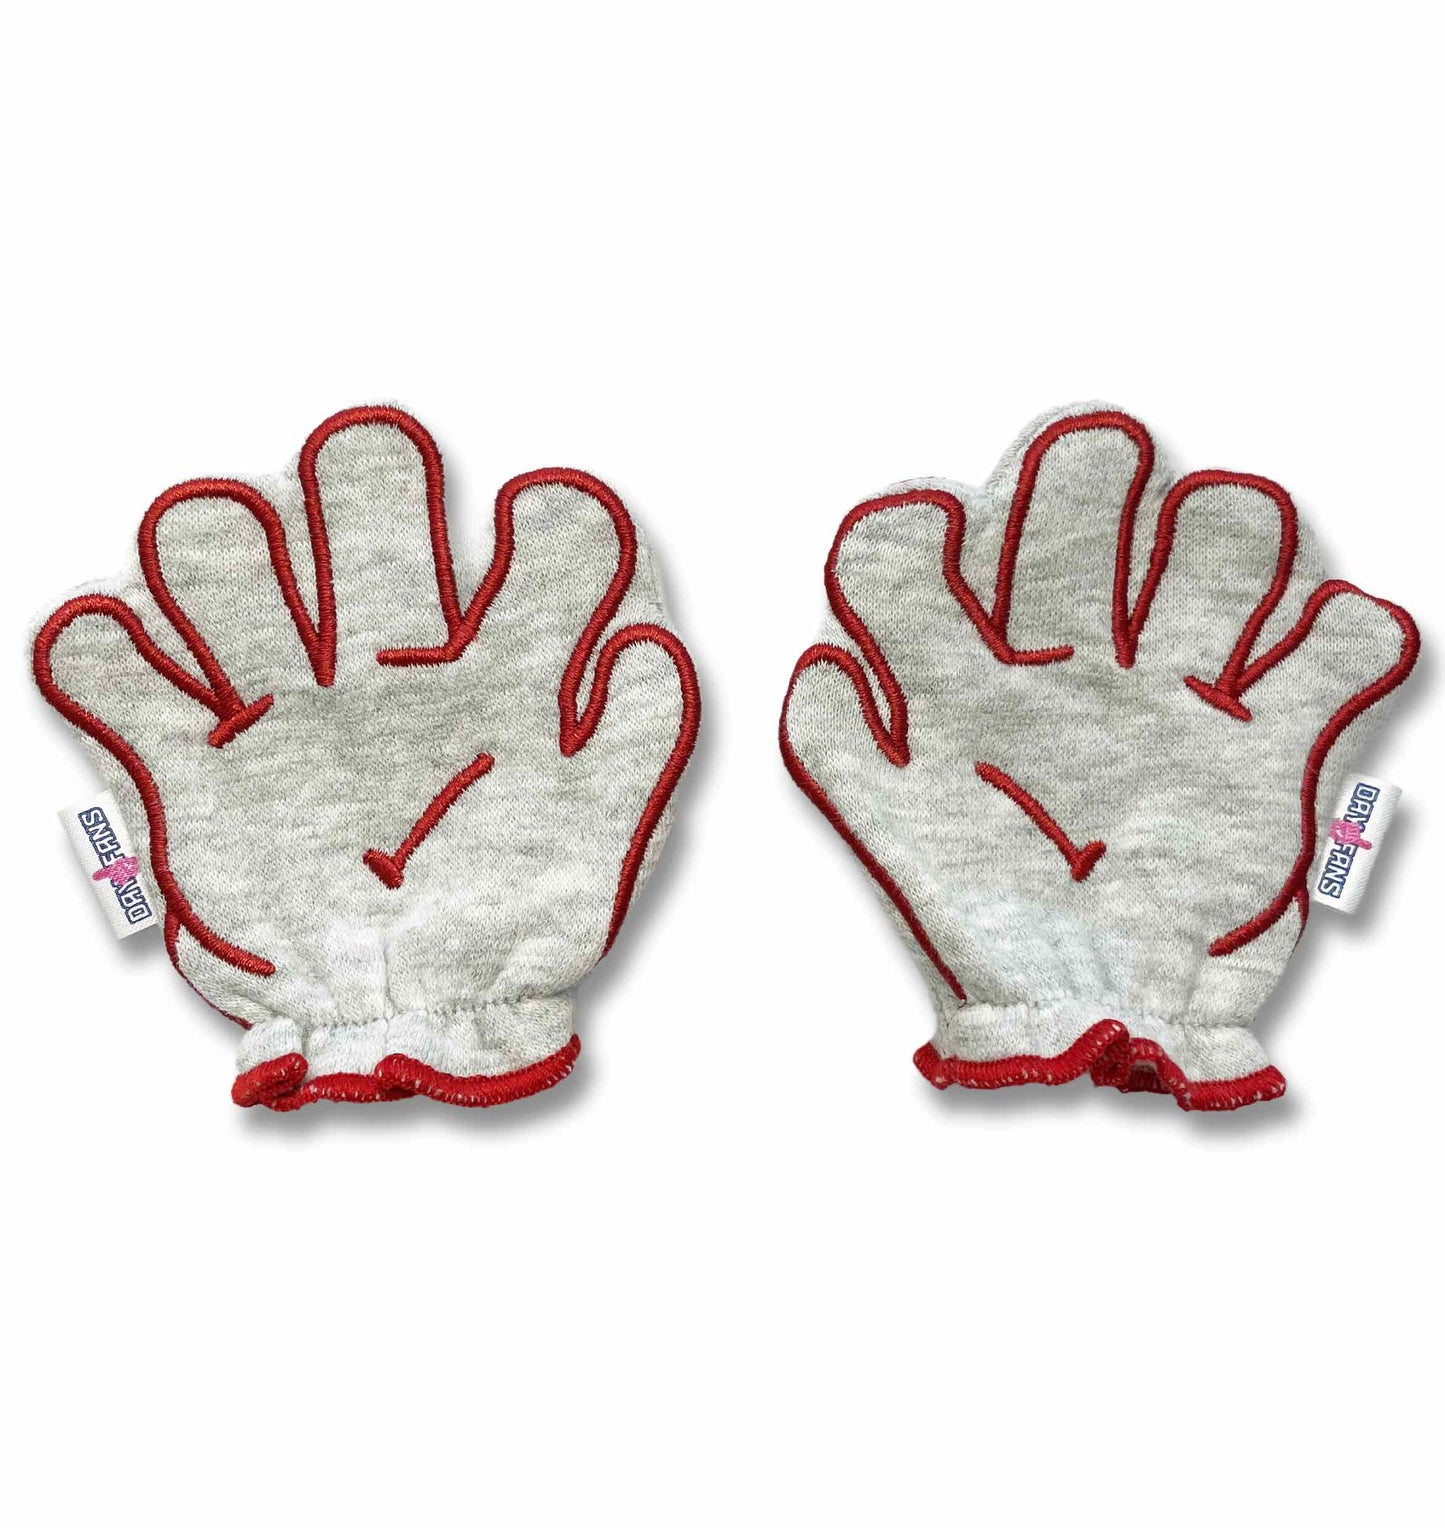 Arkansas Wooo Pig FanMitts Baby Mittens Heathered Gray Front Pair